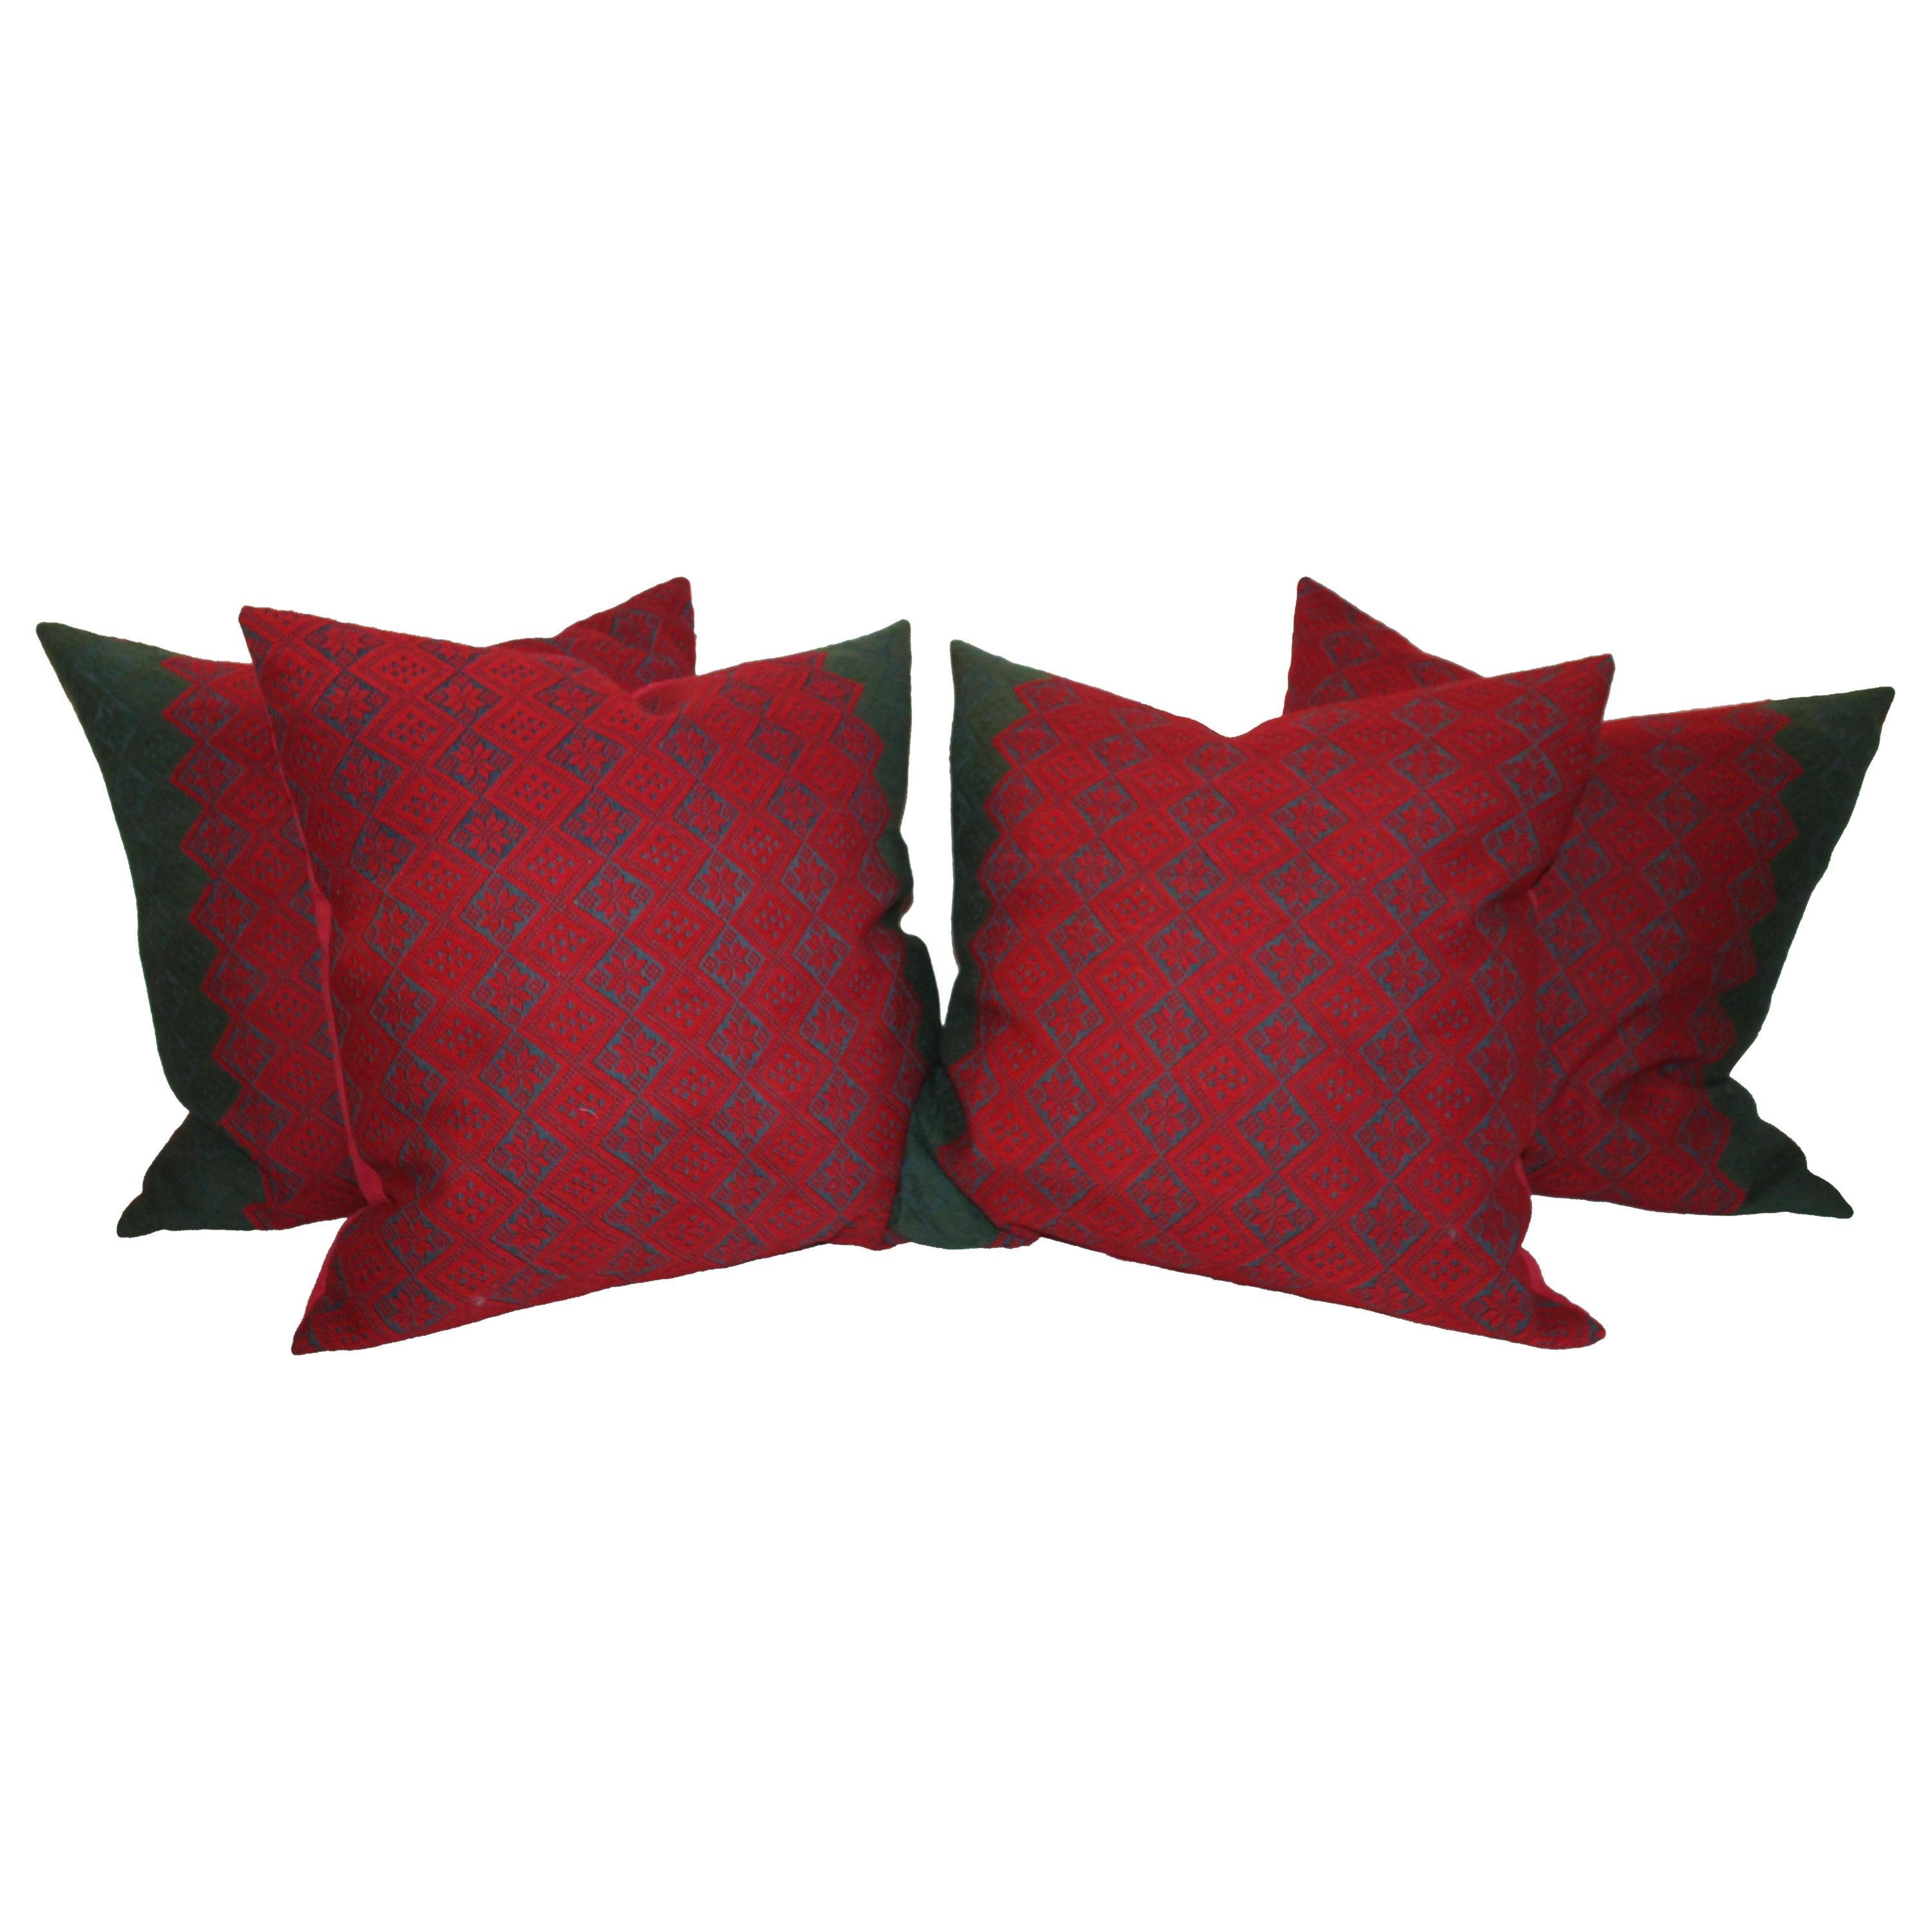 19th Century Jacquard Woven Coverlet Pillows, Collection of Four Pillows